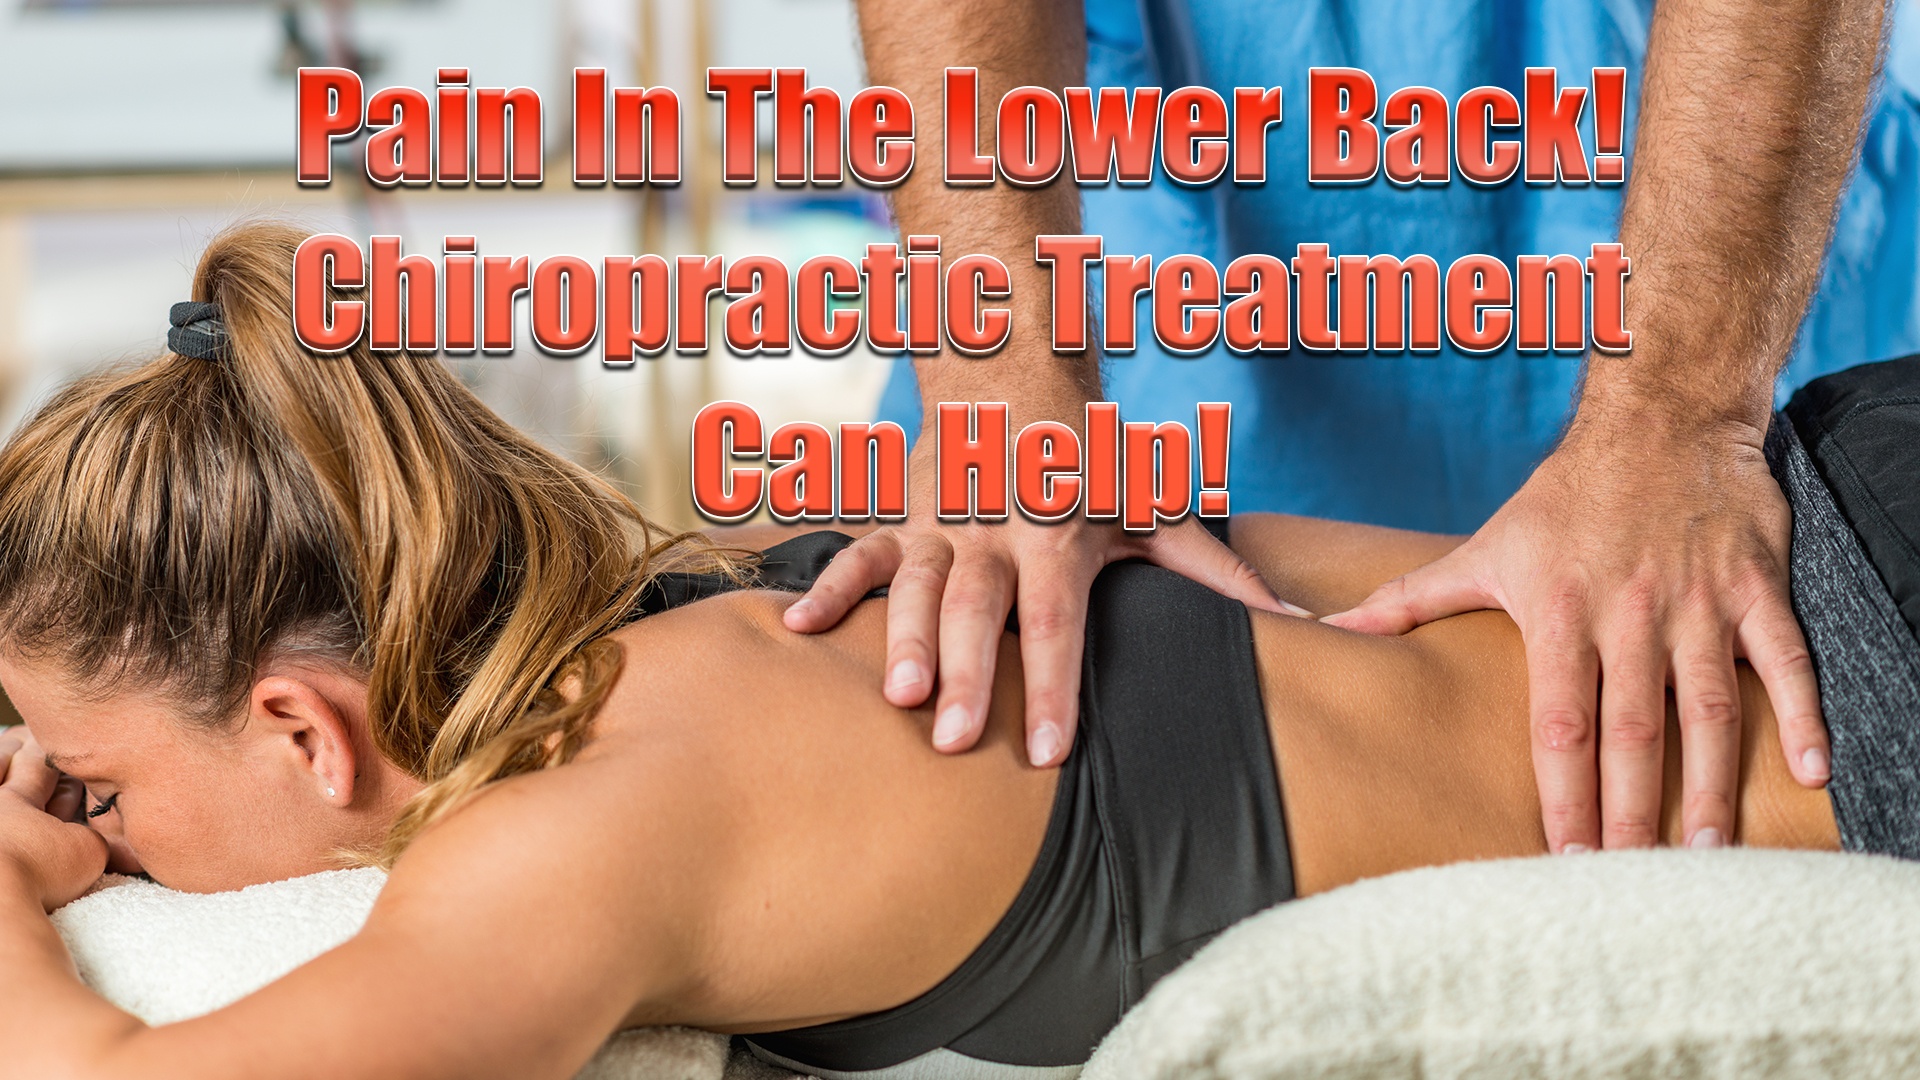 Pain In The Lower Back! Chiropractic Treatment Can Help!